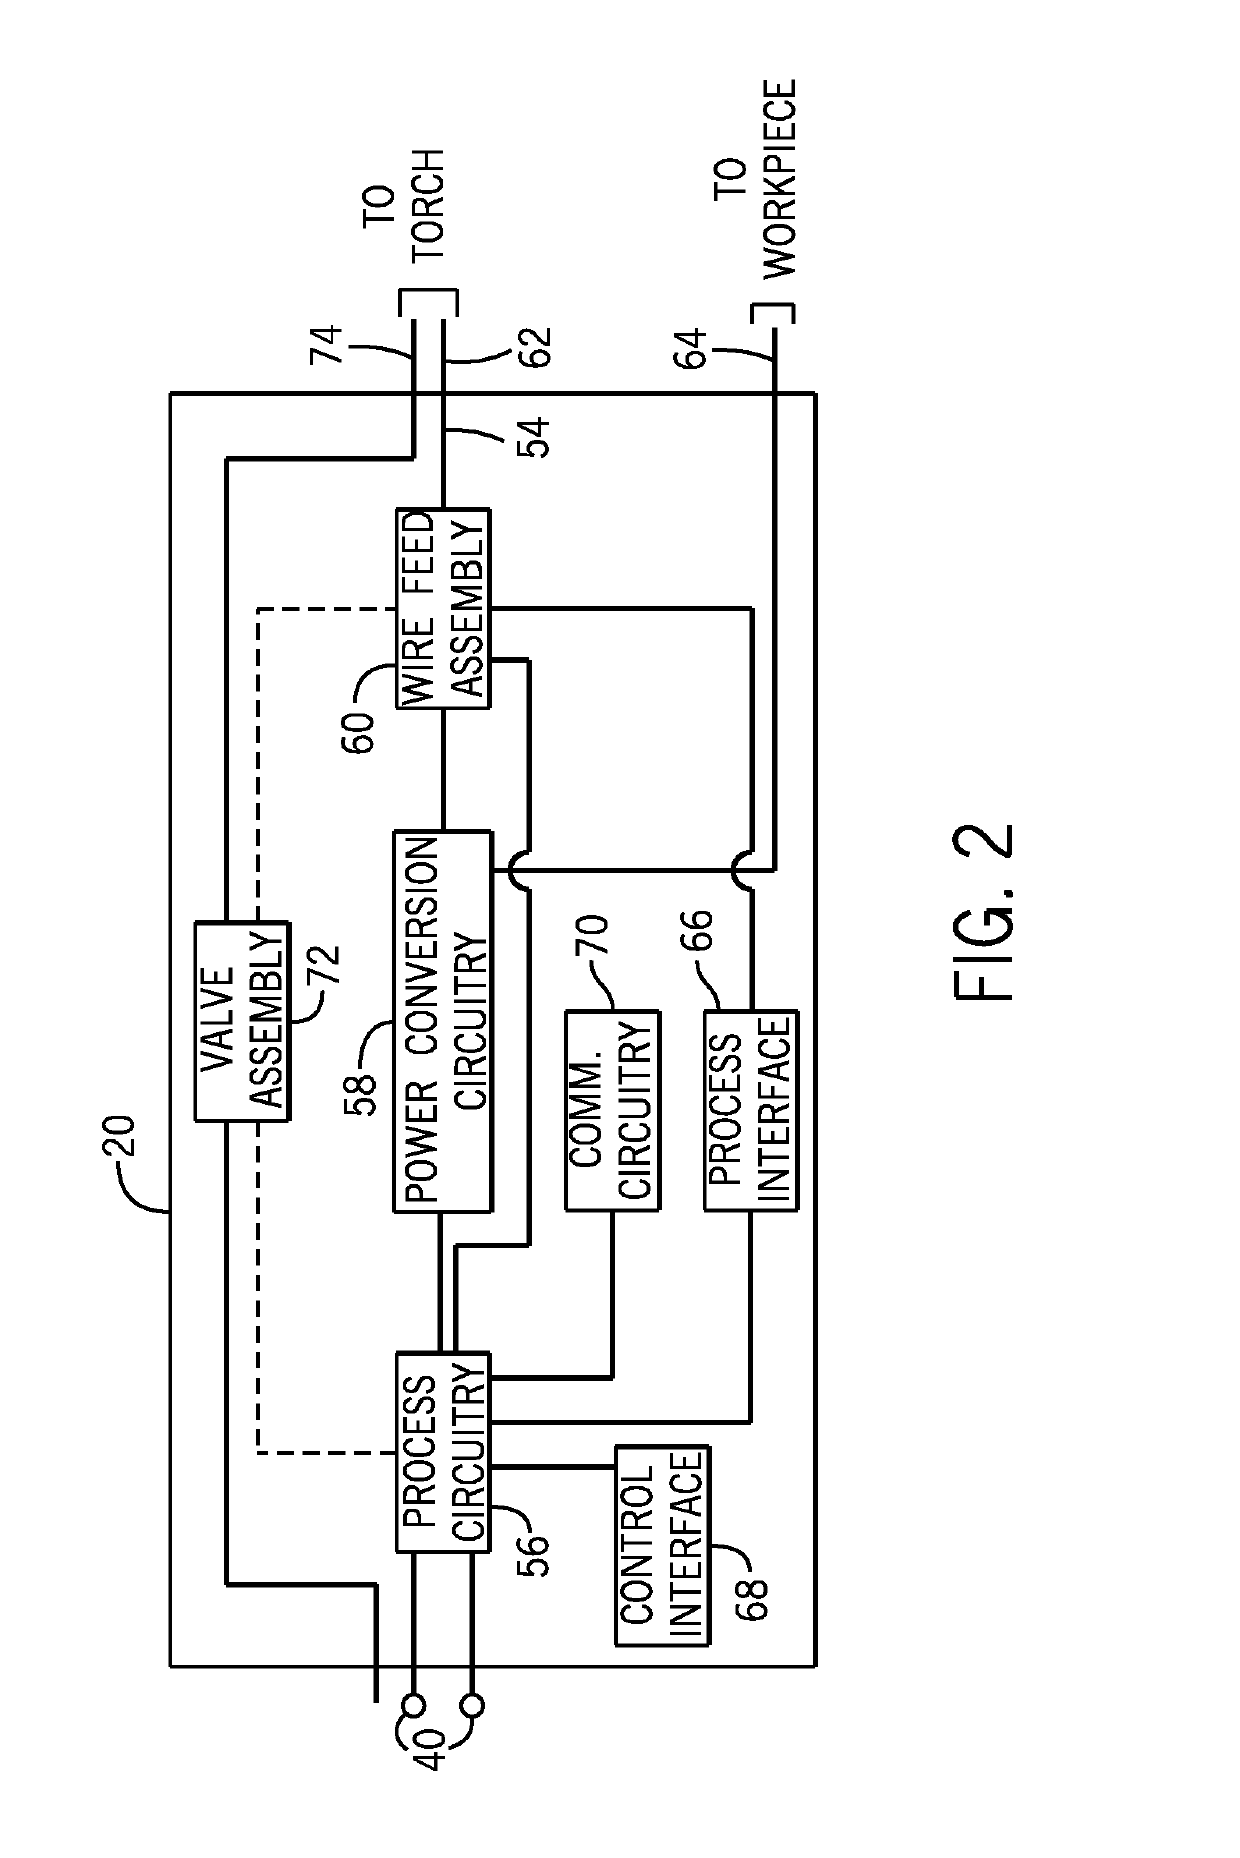 Welding wire feeder bus control system and method